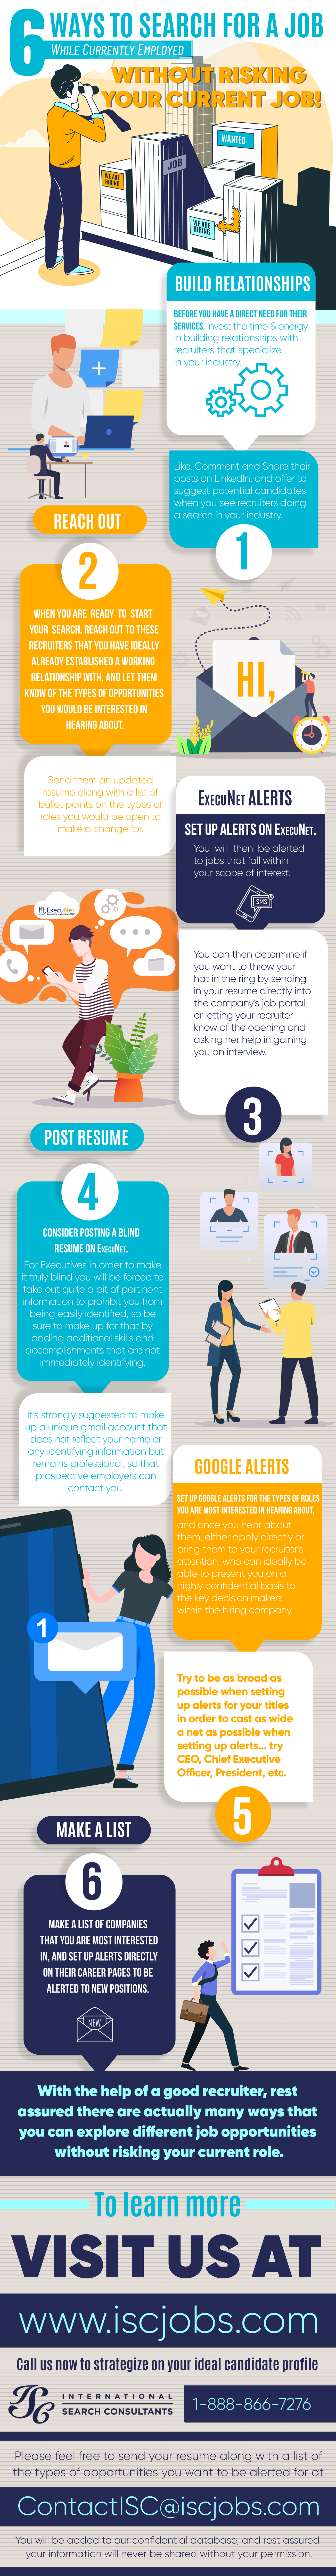 Infographic: 6 Ways to search for a job